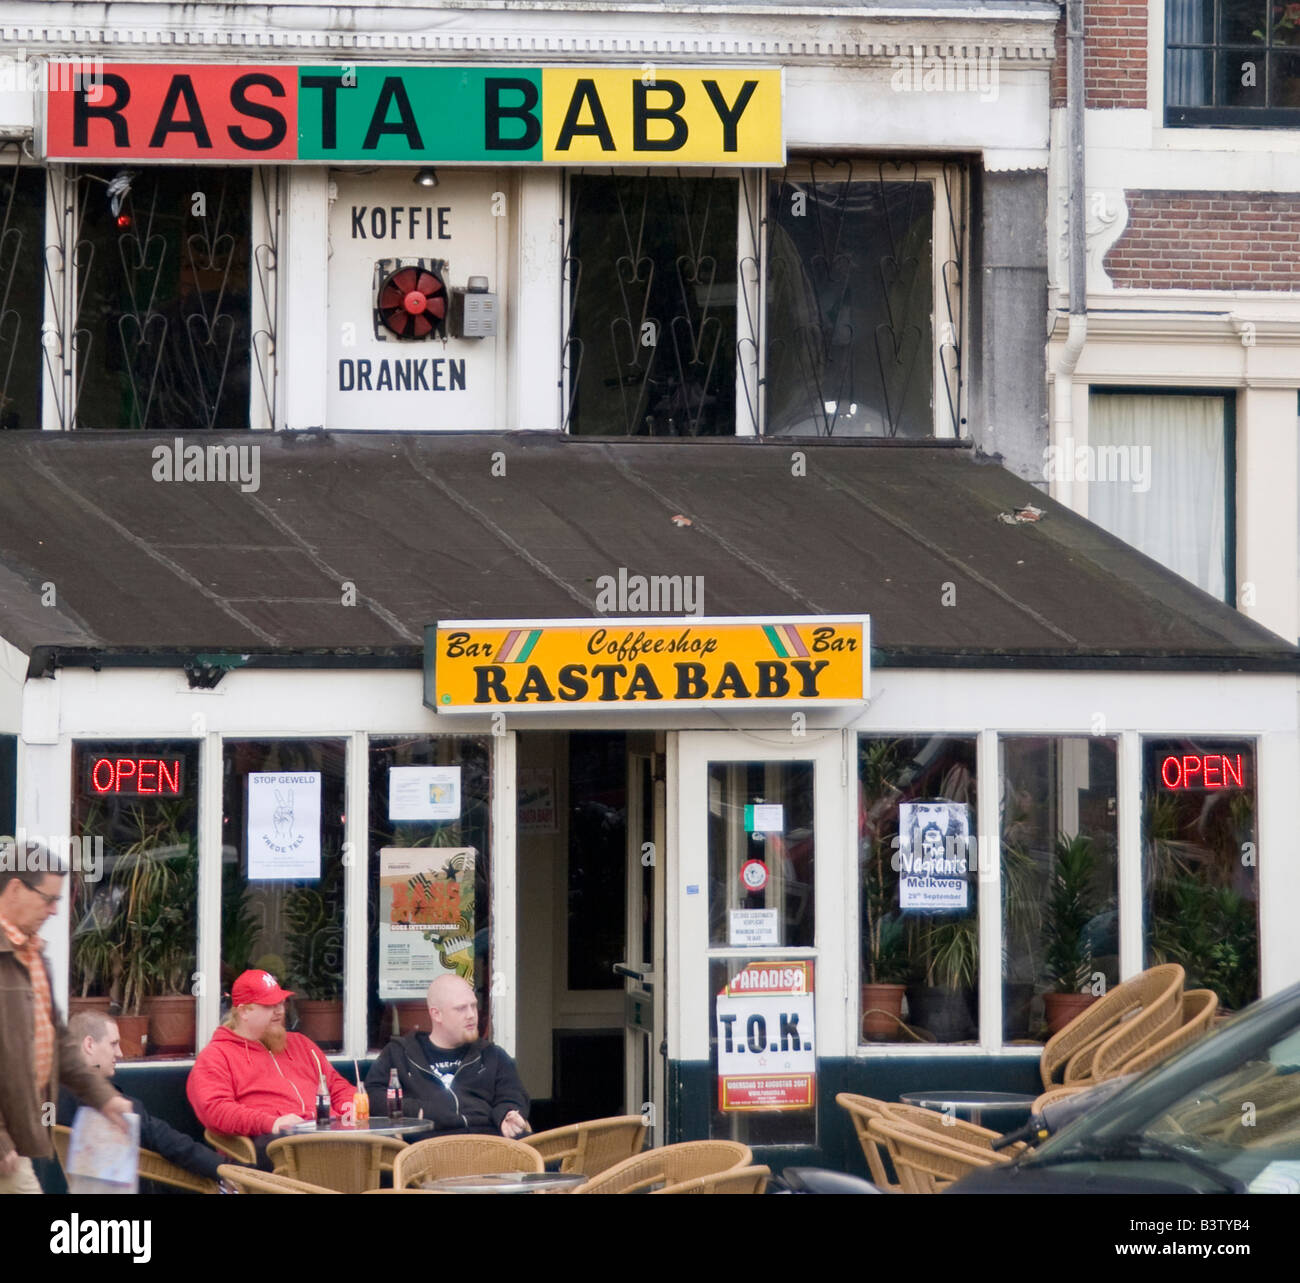 The colorful Rasta Baby CoffeeShop and patio with people Stock Photo